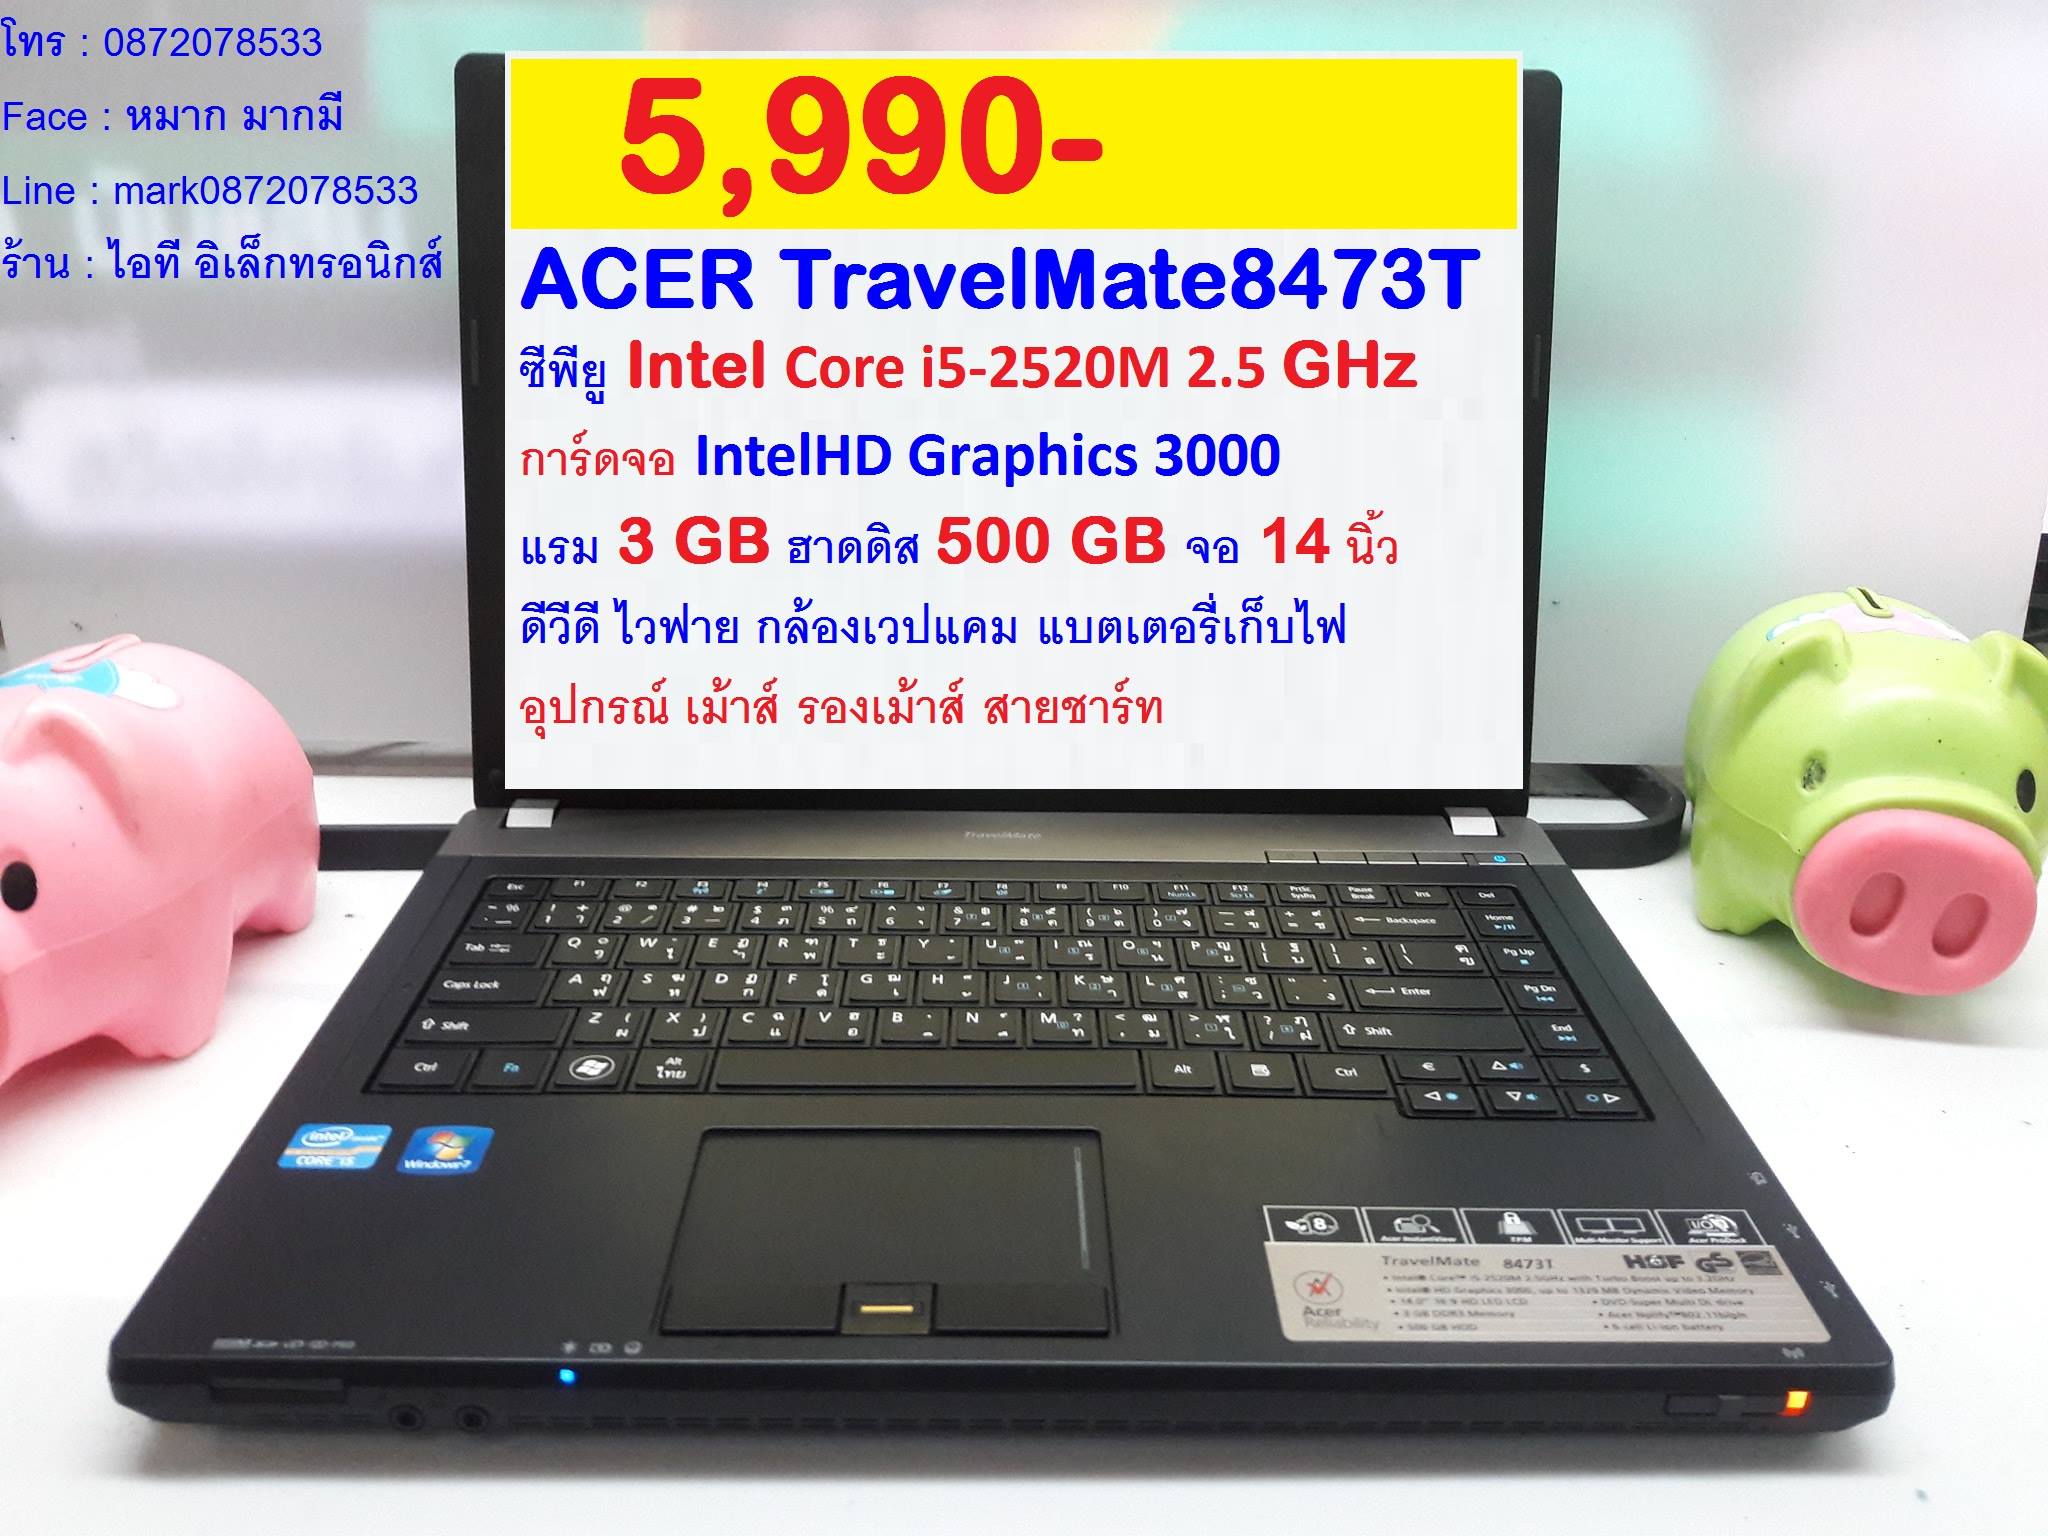  ACER TravelMate 8473T i5-2520M 2.5 GHz รูปที่ 1